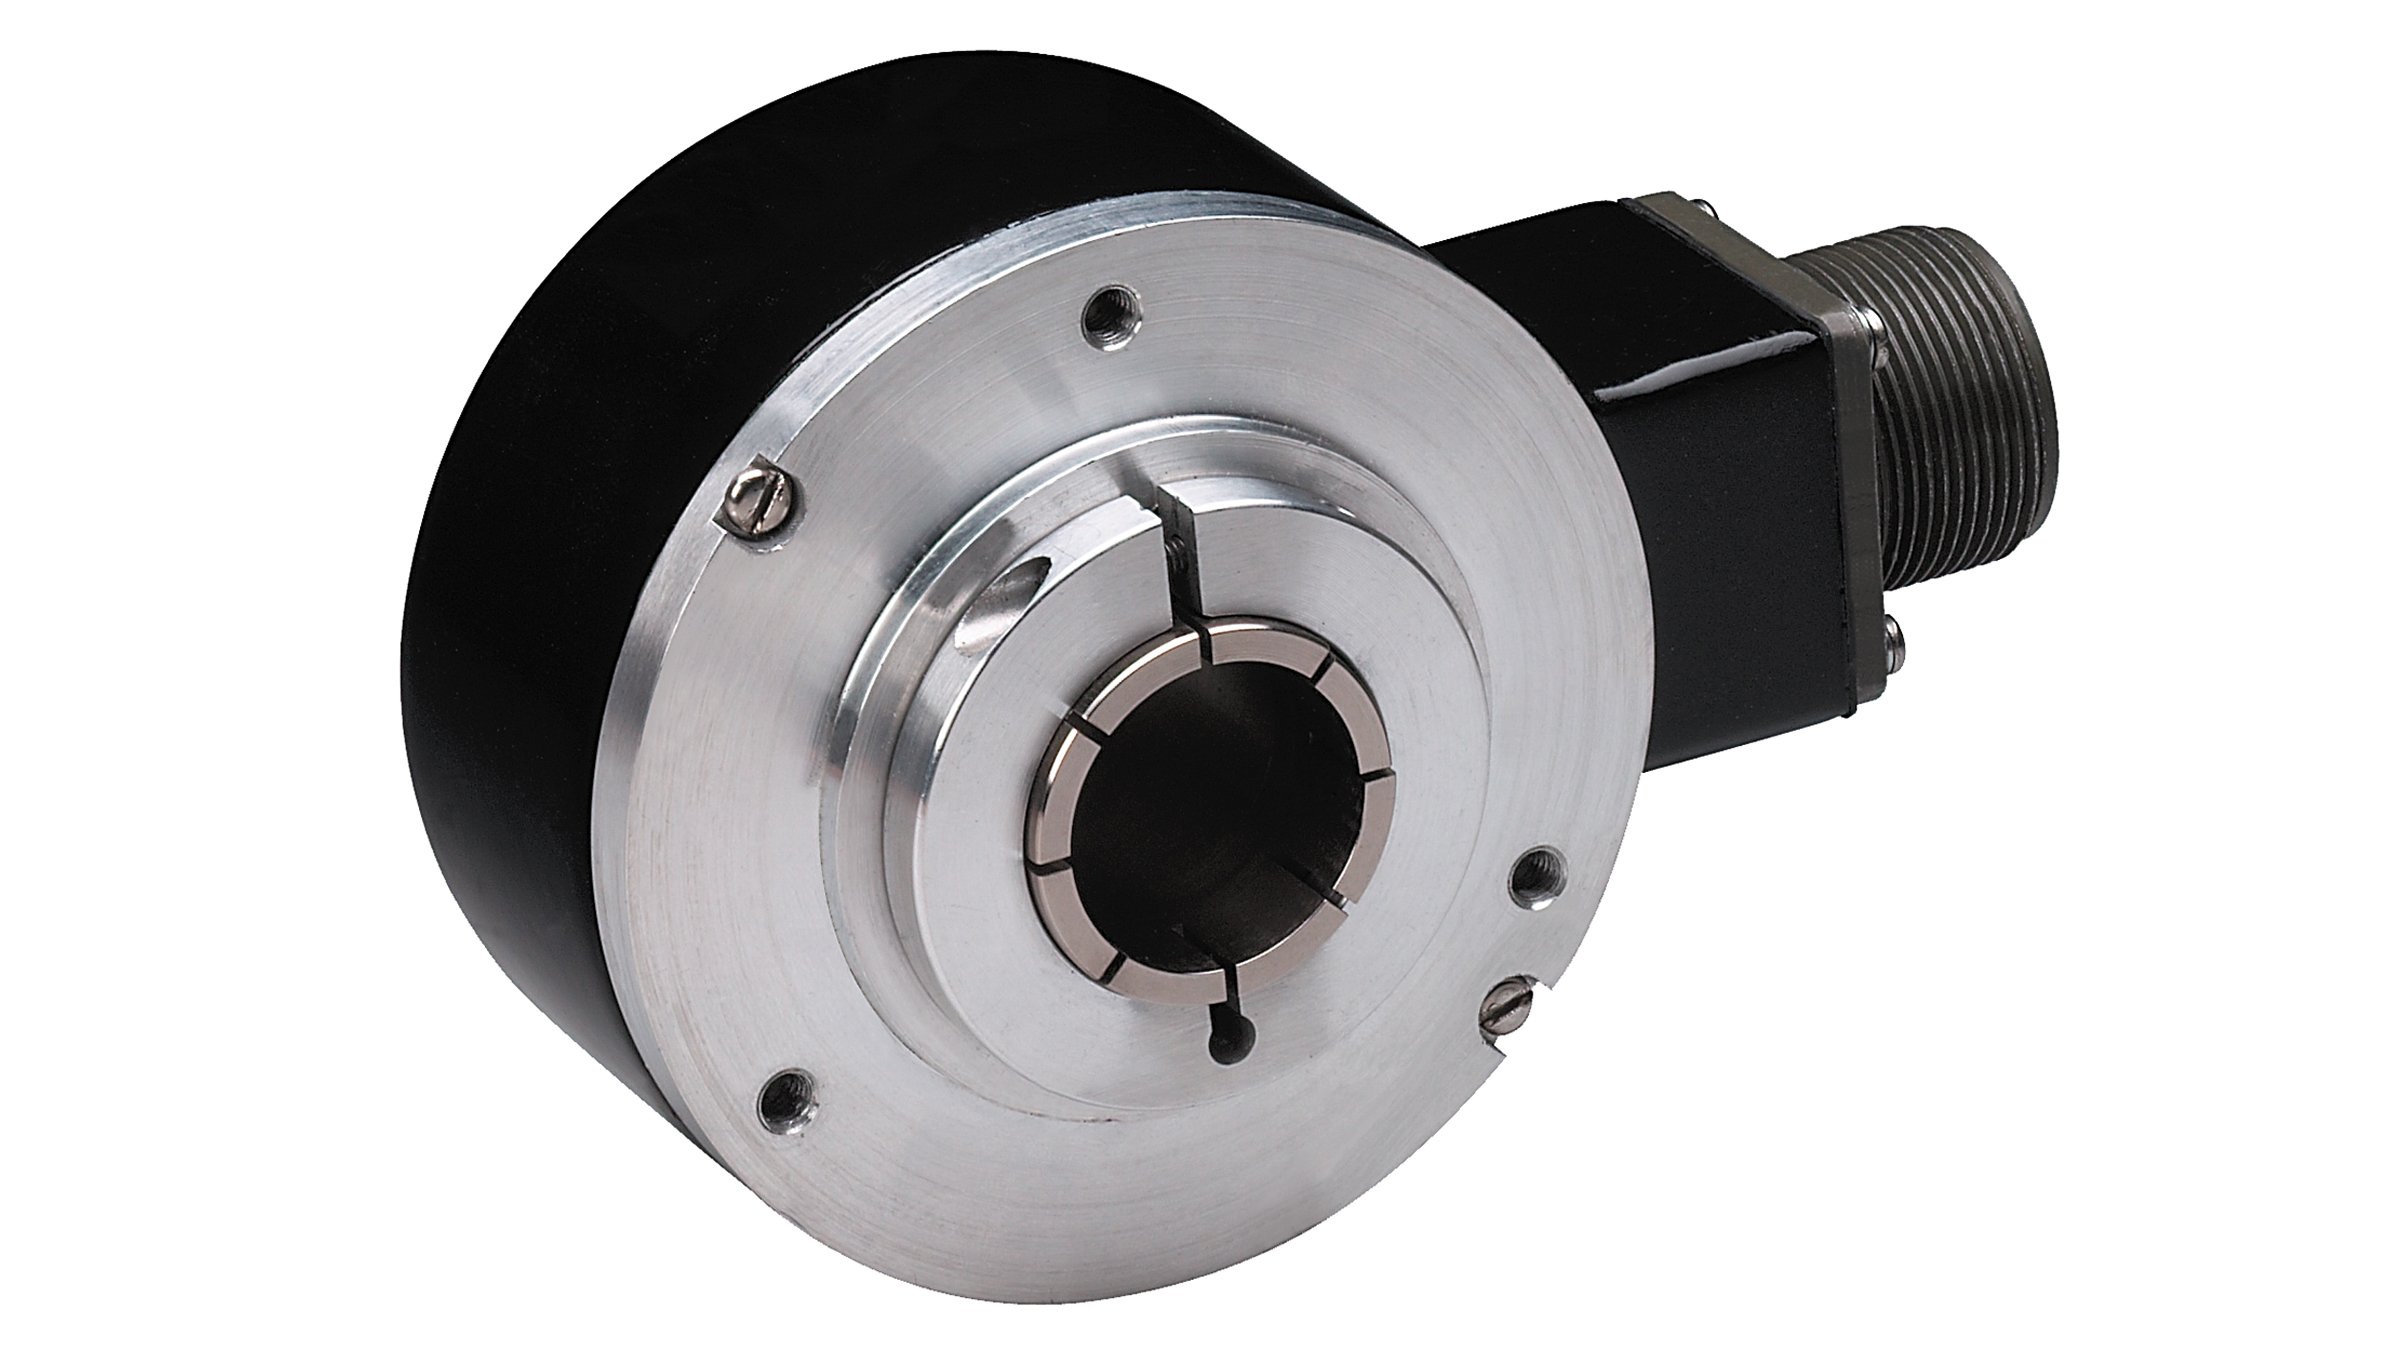 Allen‑Bradley Bulletin 844D High-frequency Incremental Optical Encoders mount directly to the monitored shaft by a split collar clamp on the encoder, eliminating the need for mounting plates and flexible couplings.